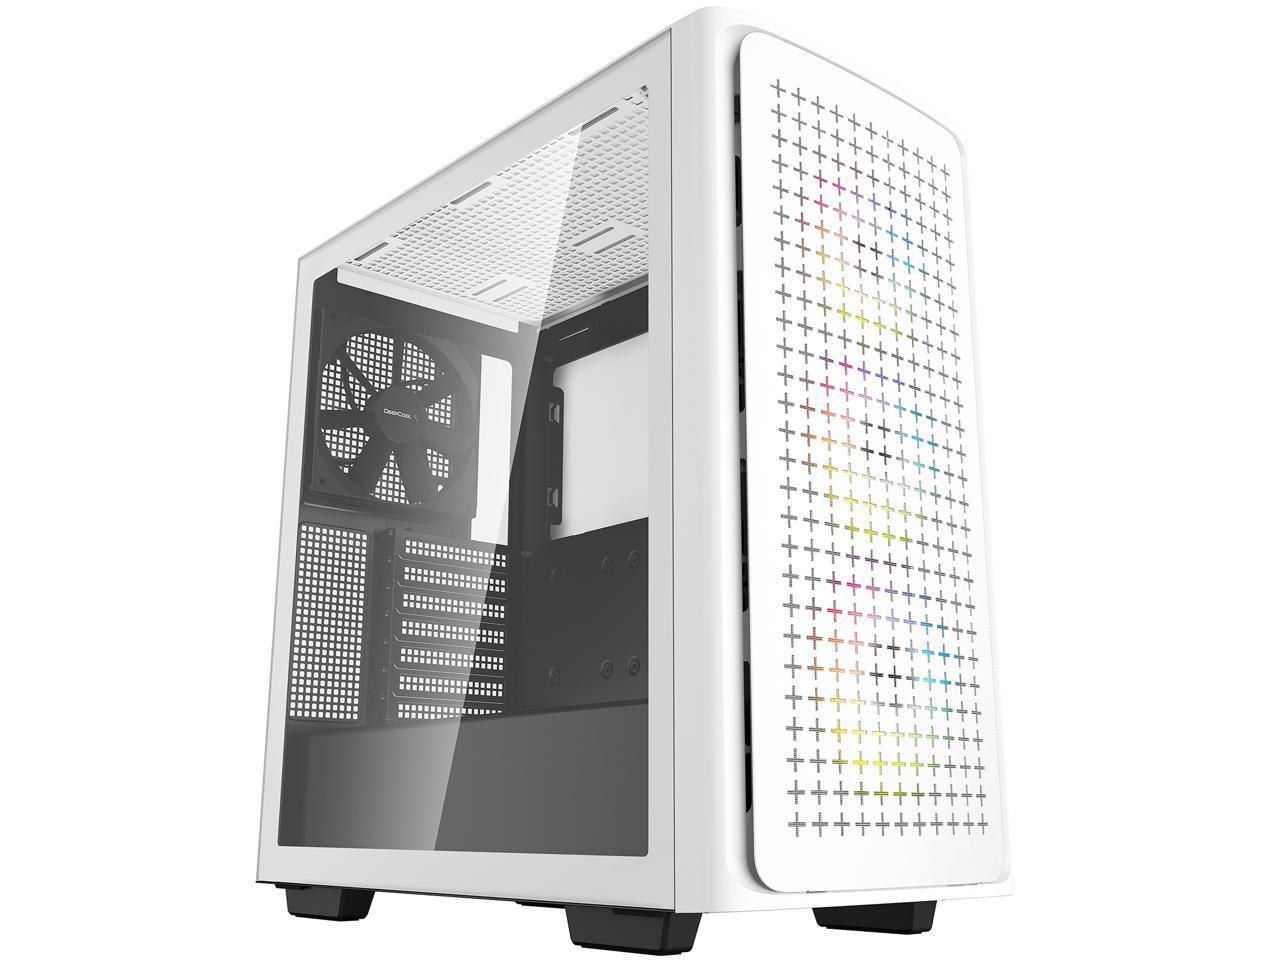 Deepcool CK560 WH R-Ck560-Whaae4-G-1 White Abs / SPCC / Tempered Glass Atx Mid Tower Computer Case